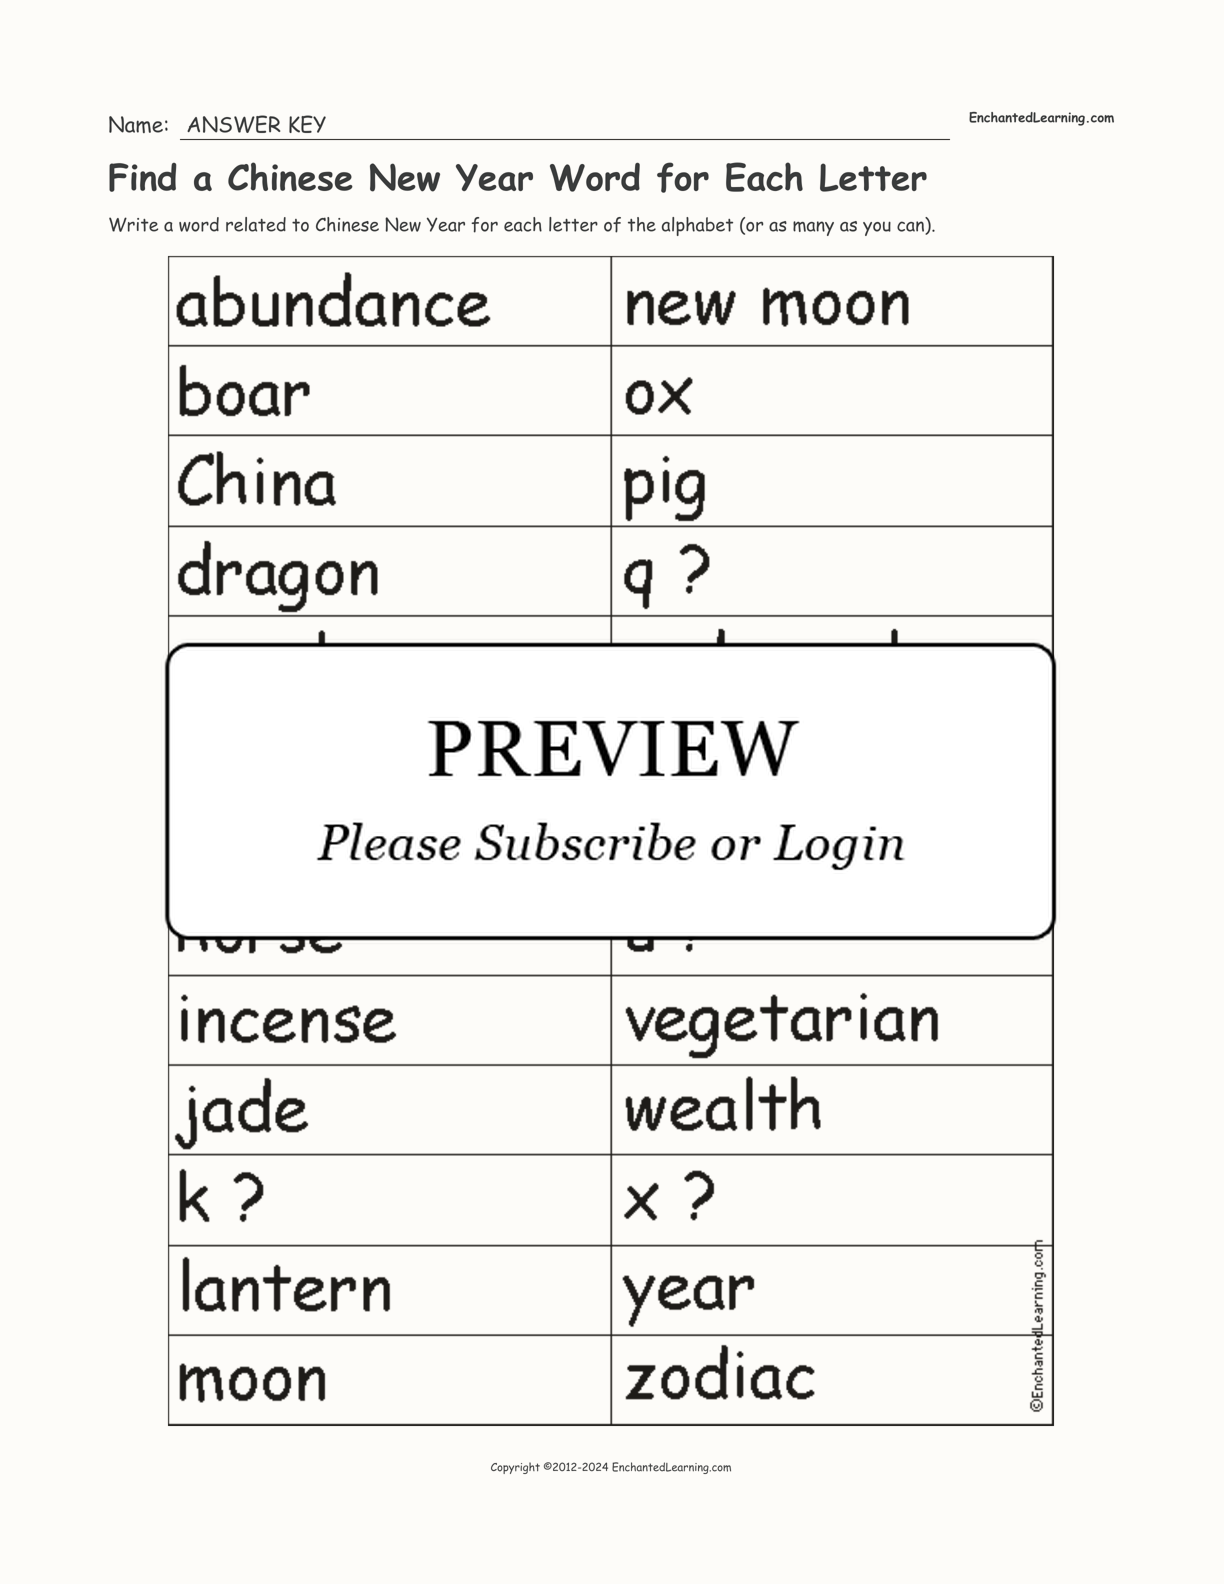 Find a Chinese New Year Word for Each Letter interactive worksheet page 2